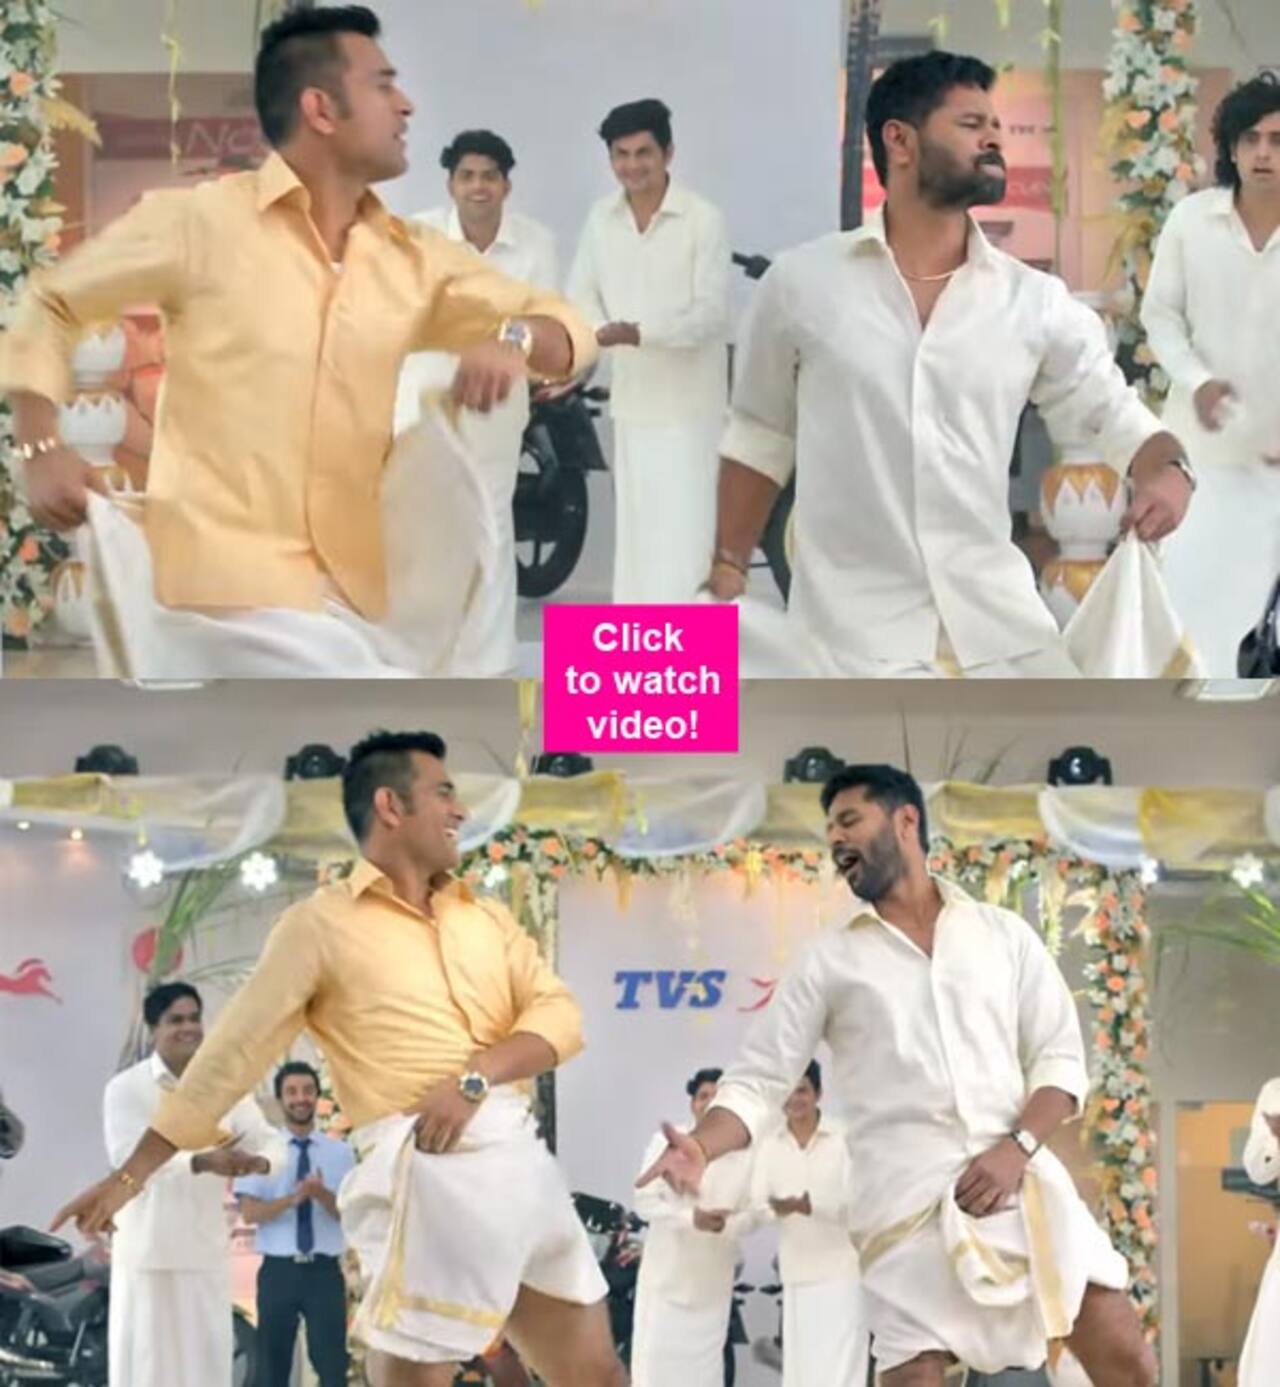 This quirky TVS ad featuring Prabhu Deva and M.S.Dhoni will make you smile!